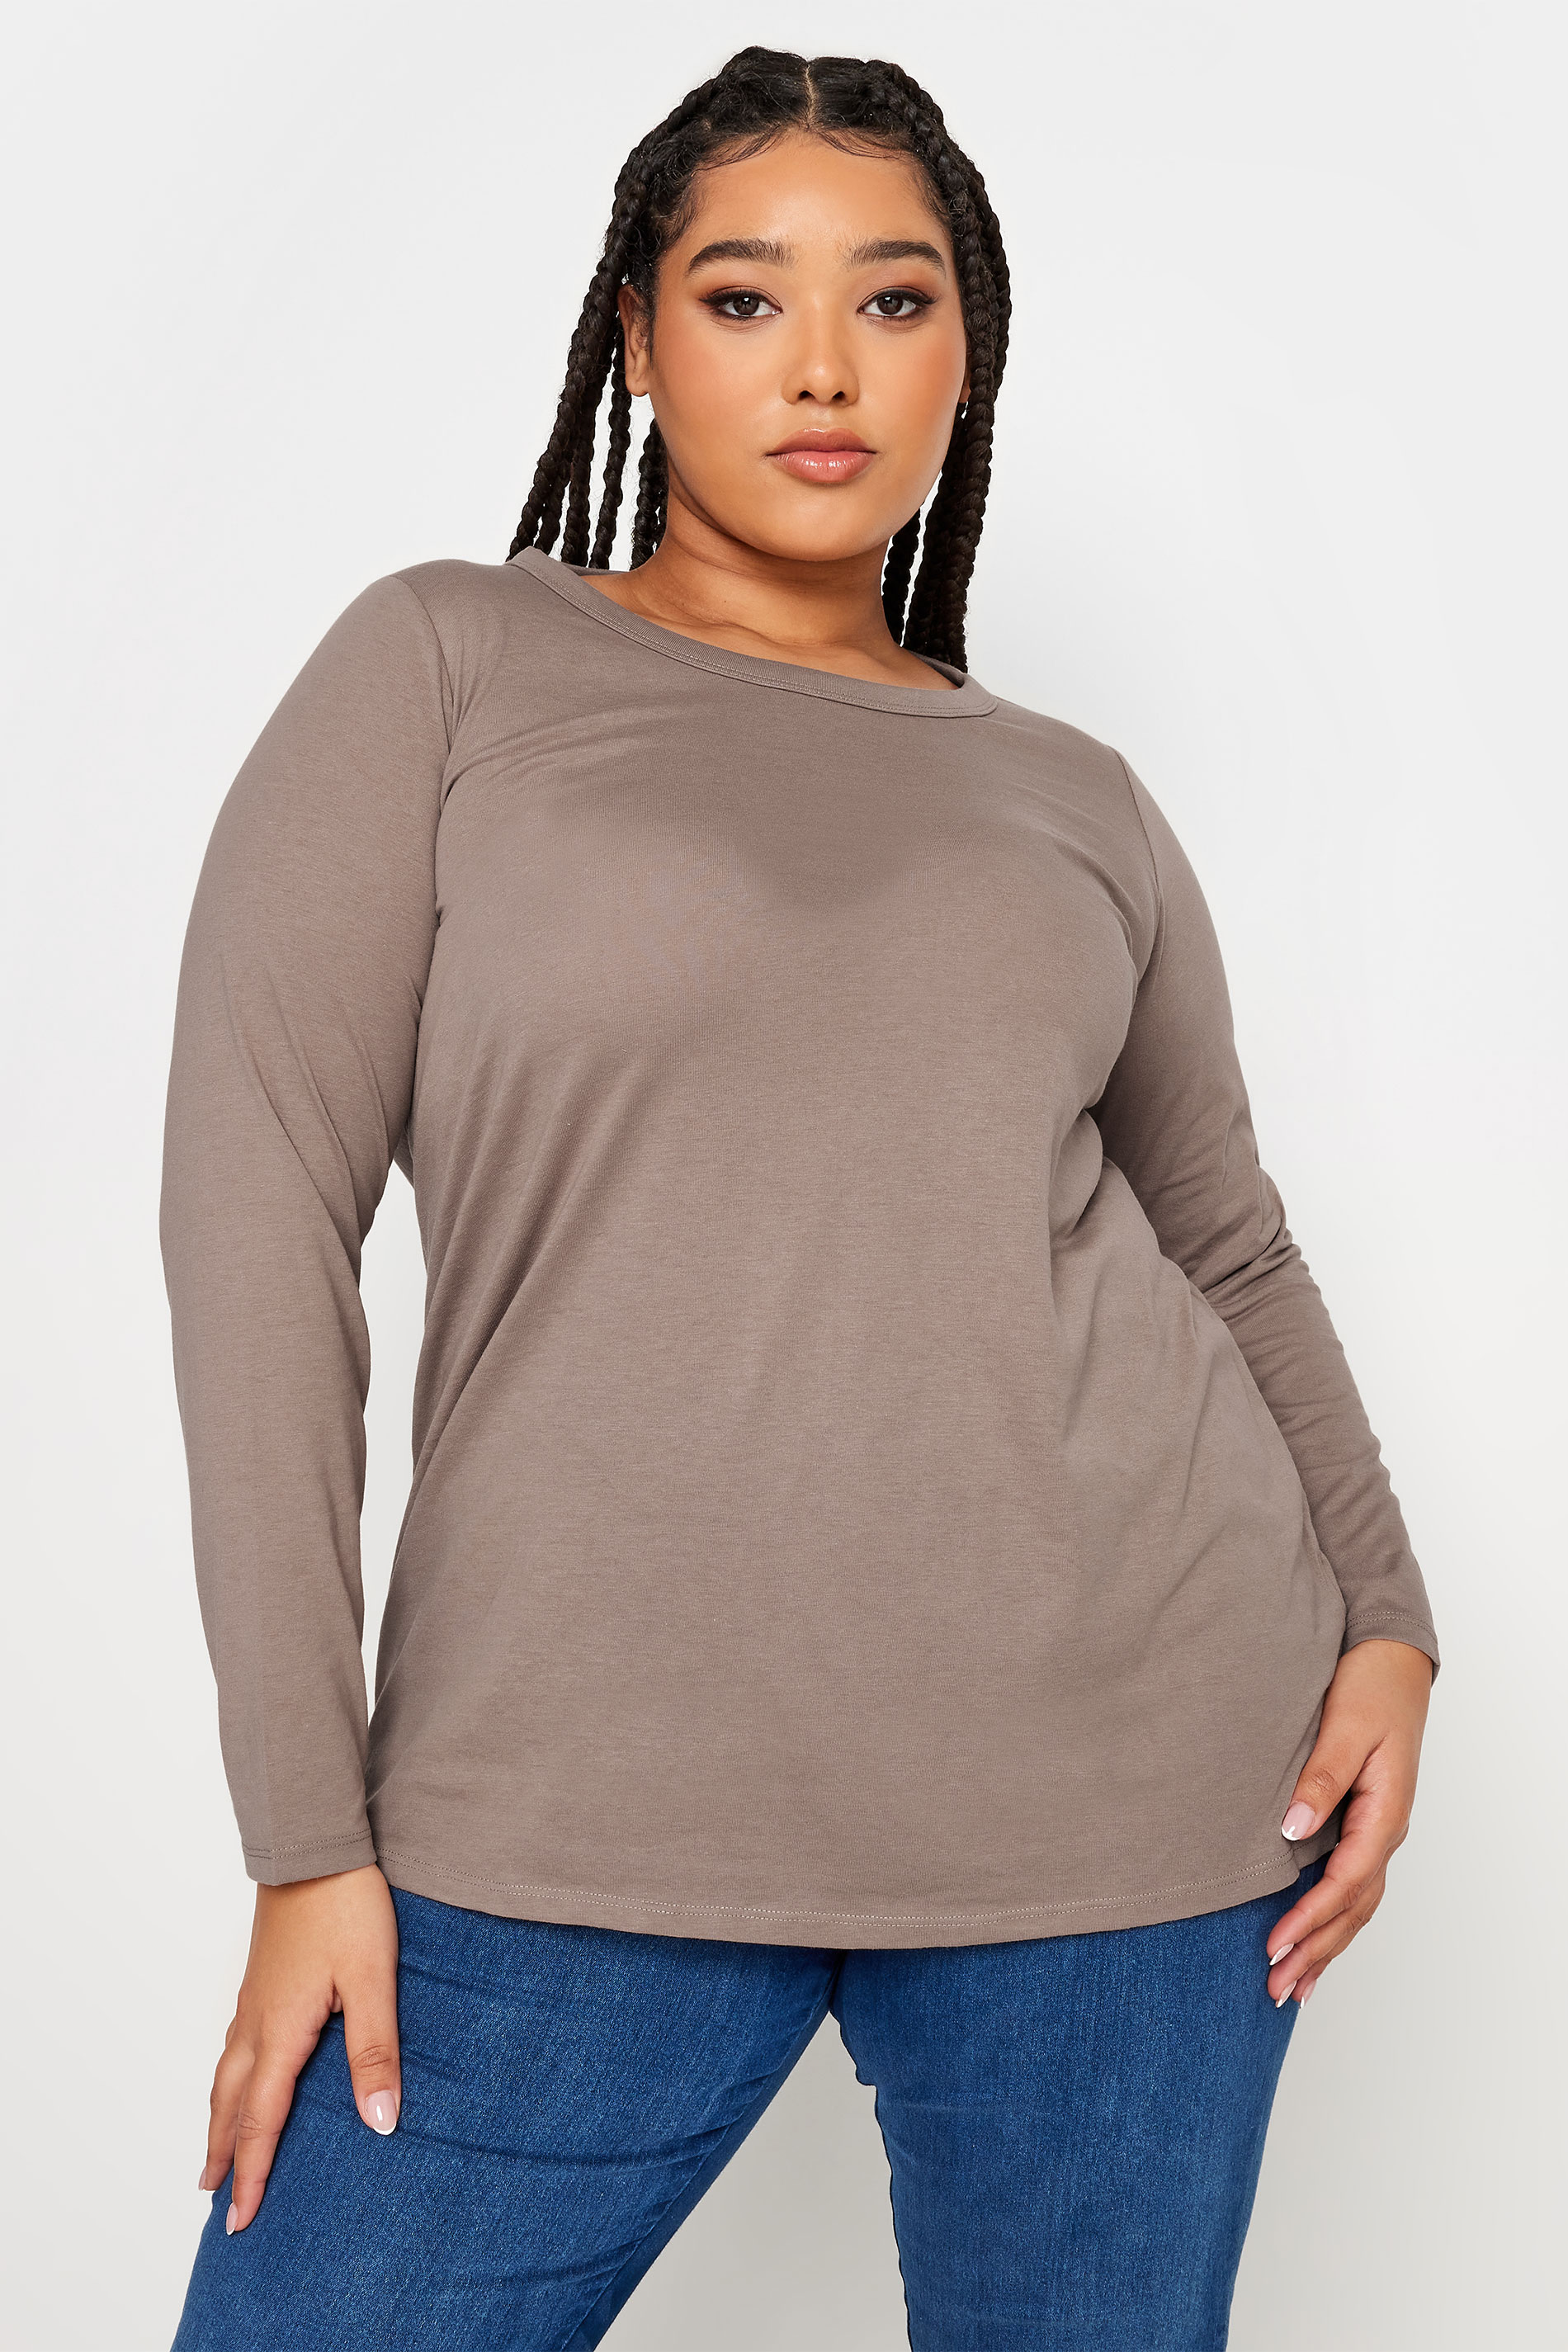 YOURS 3 PACK Plus Size Pink & Black Long Sleeve Tops | Yours Clothing 3